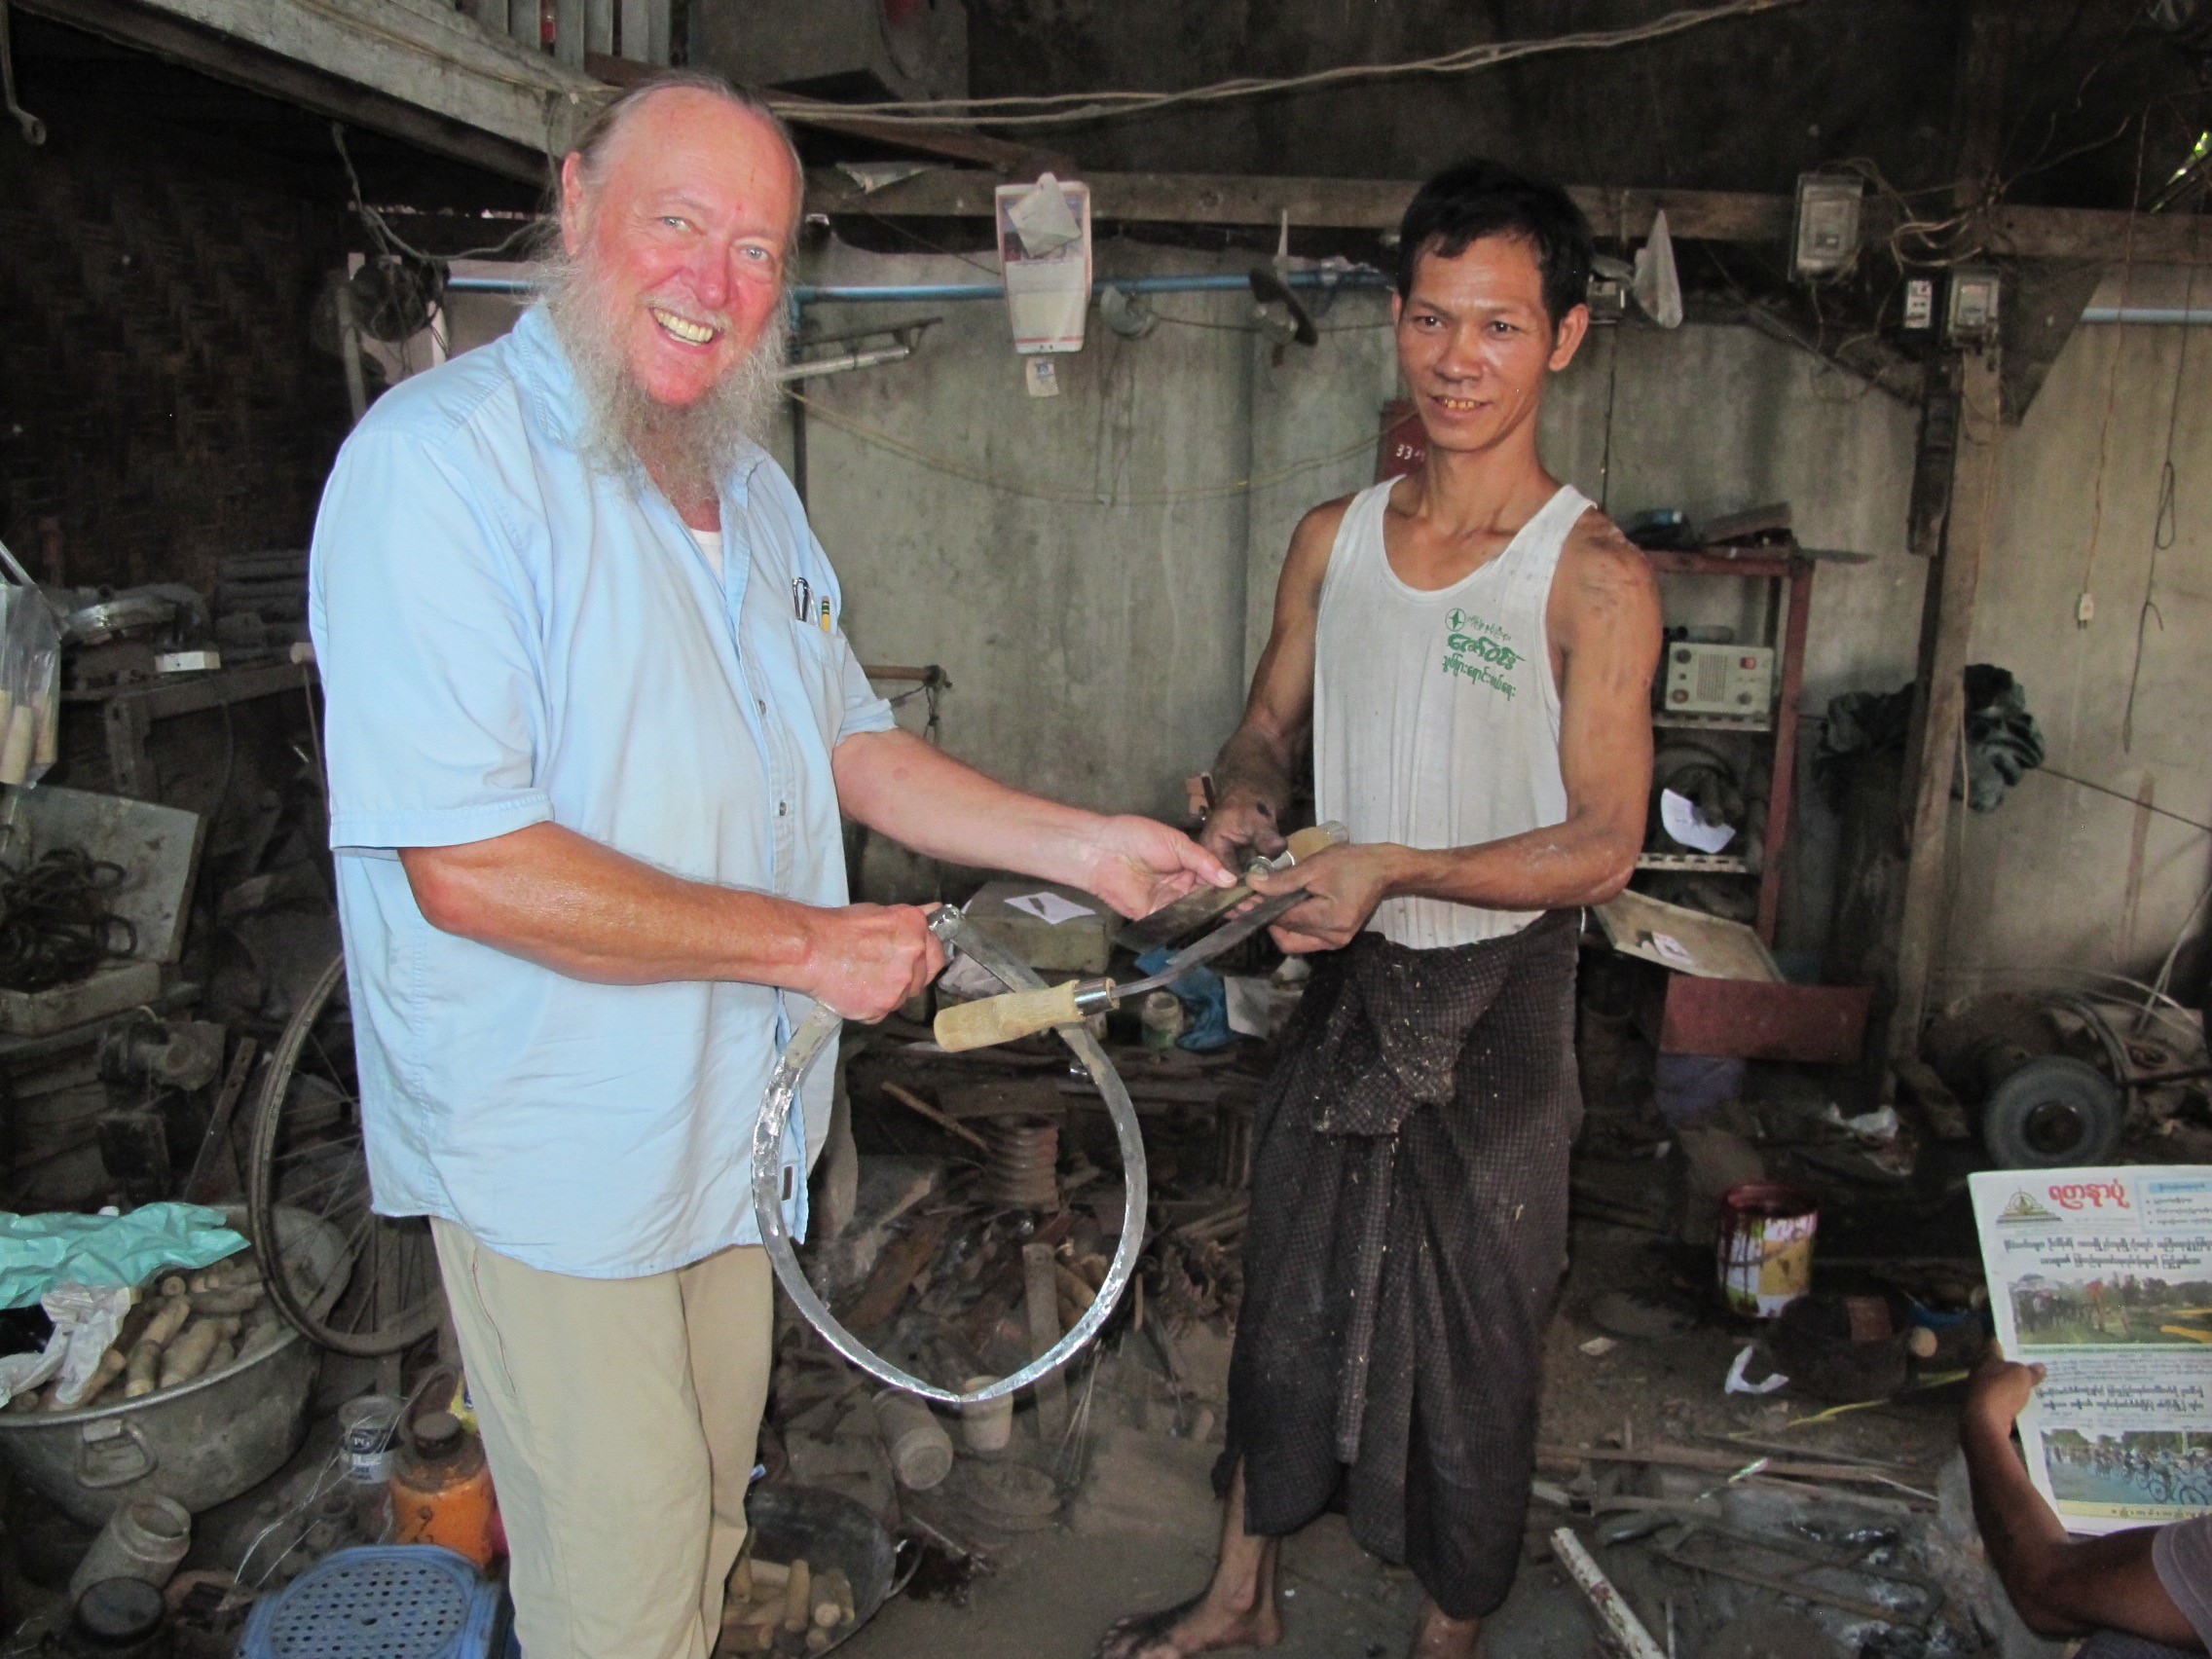 Since the master blacksmith, Than Naing Oo, spoke no English, and I spoke no Myanmar, we worked from photos and drawings. Photo by Laura Saeger.